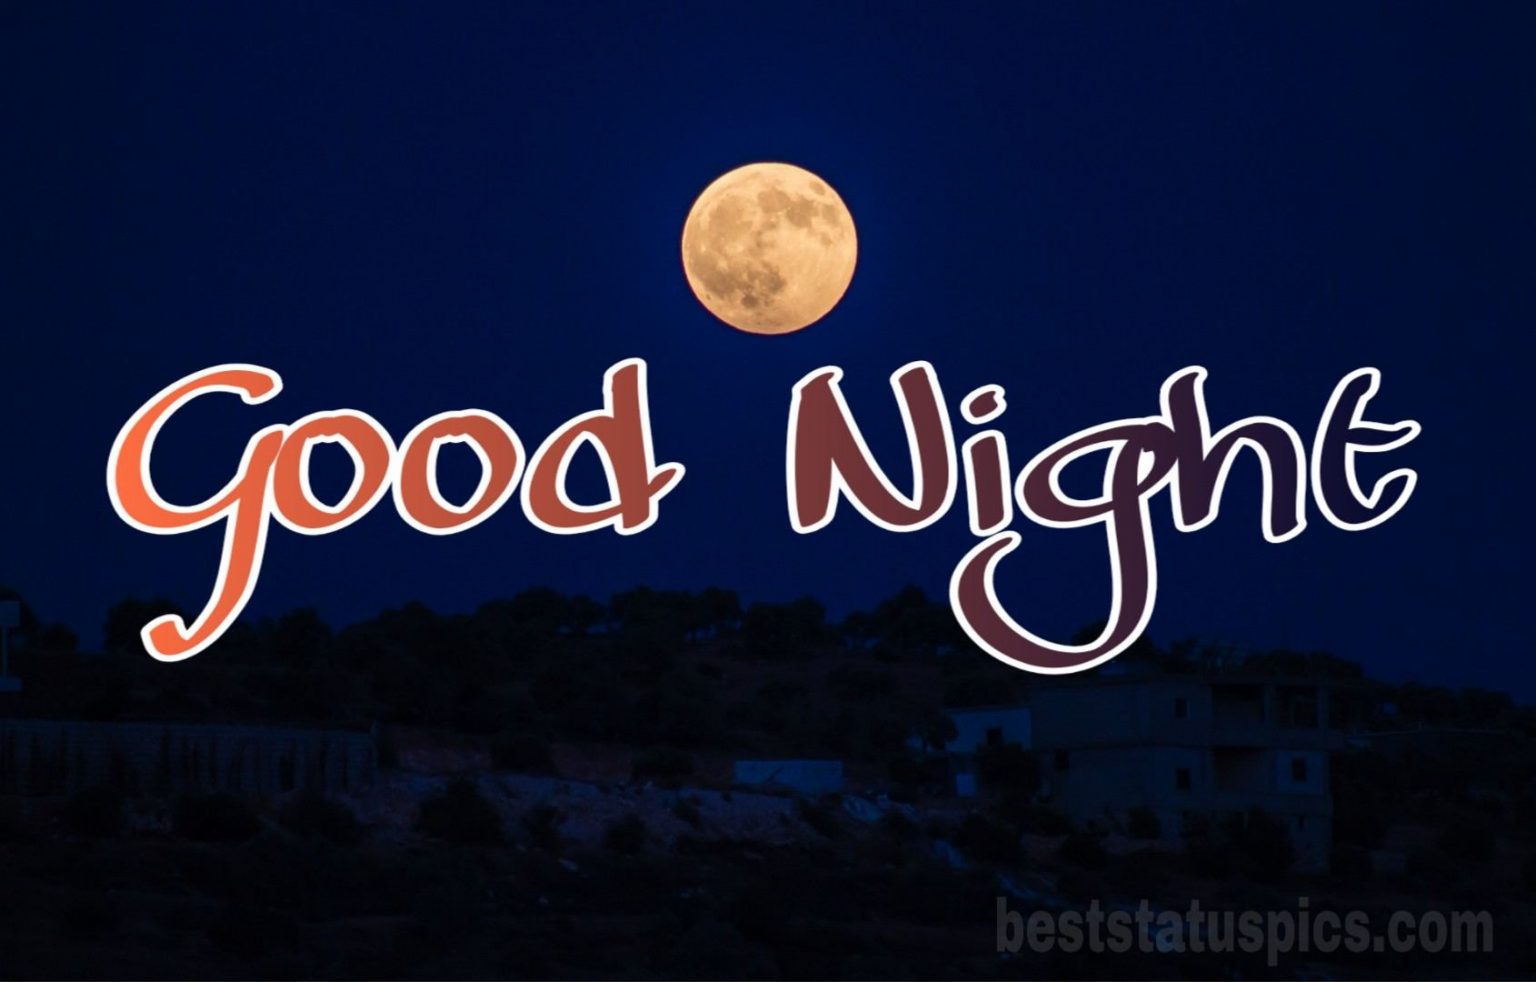 121+ Good Night Images With Moon And Stars [2022] - Best Status Pics